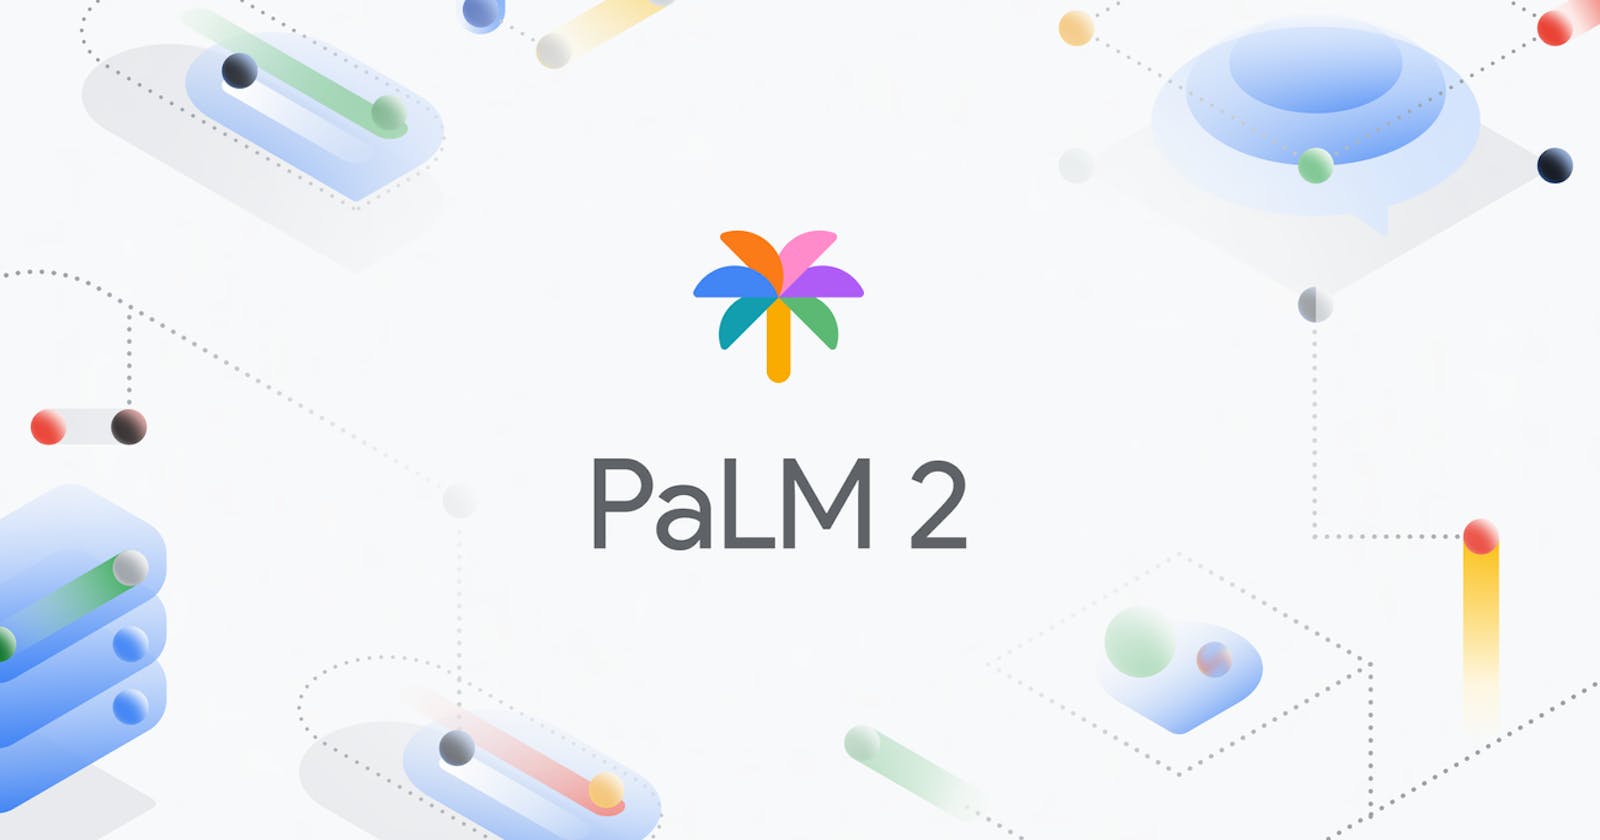 Access PaLM 2 Models using the PaLM API. Intro tutorial